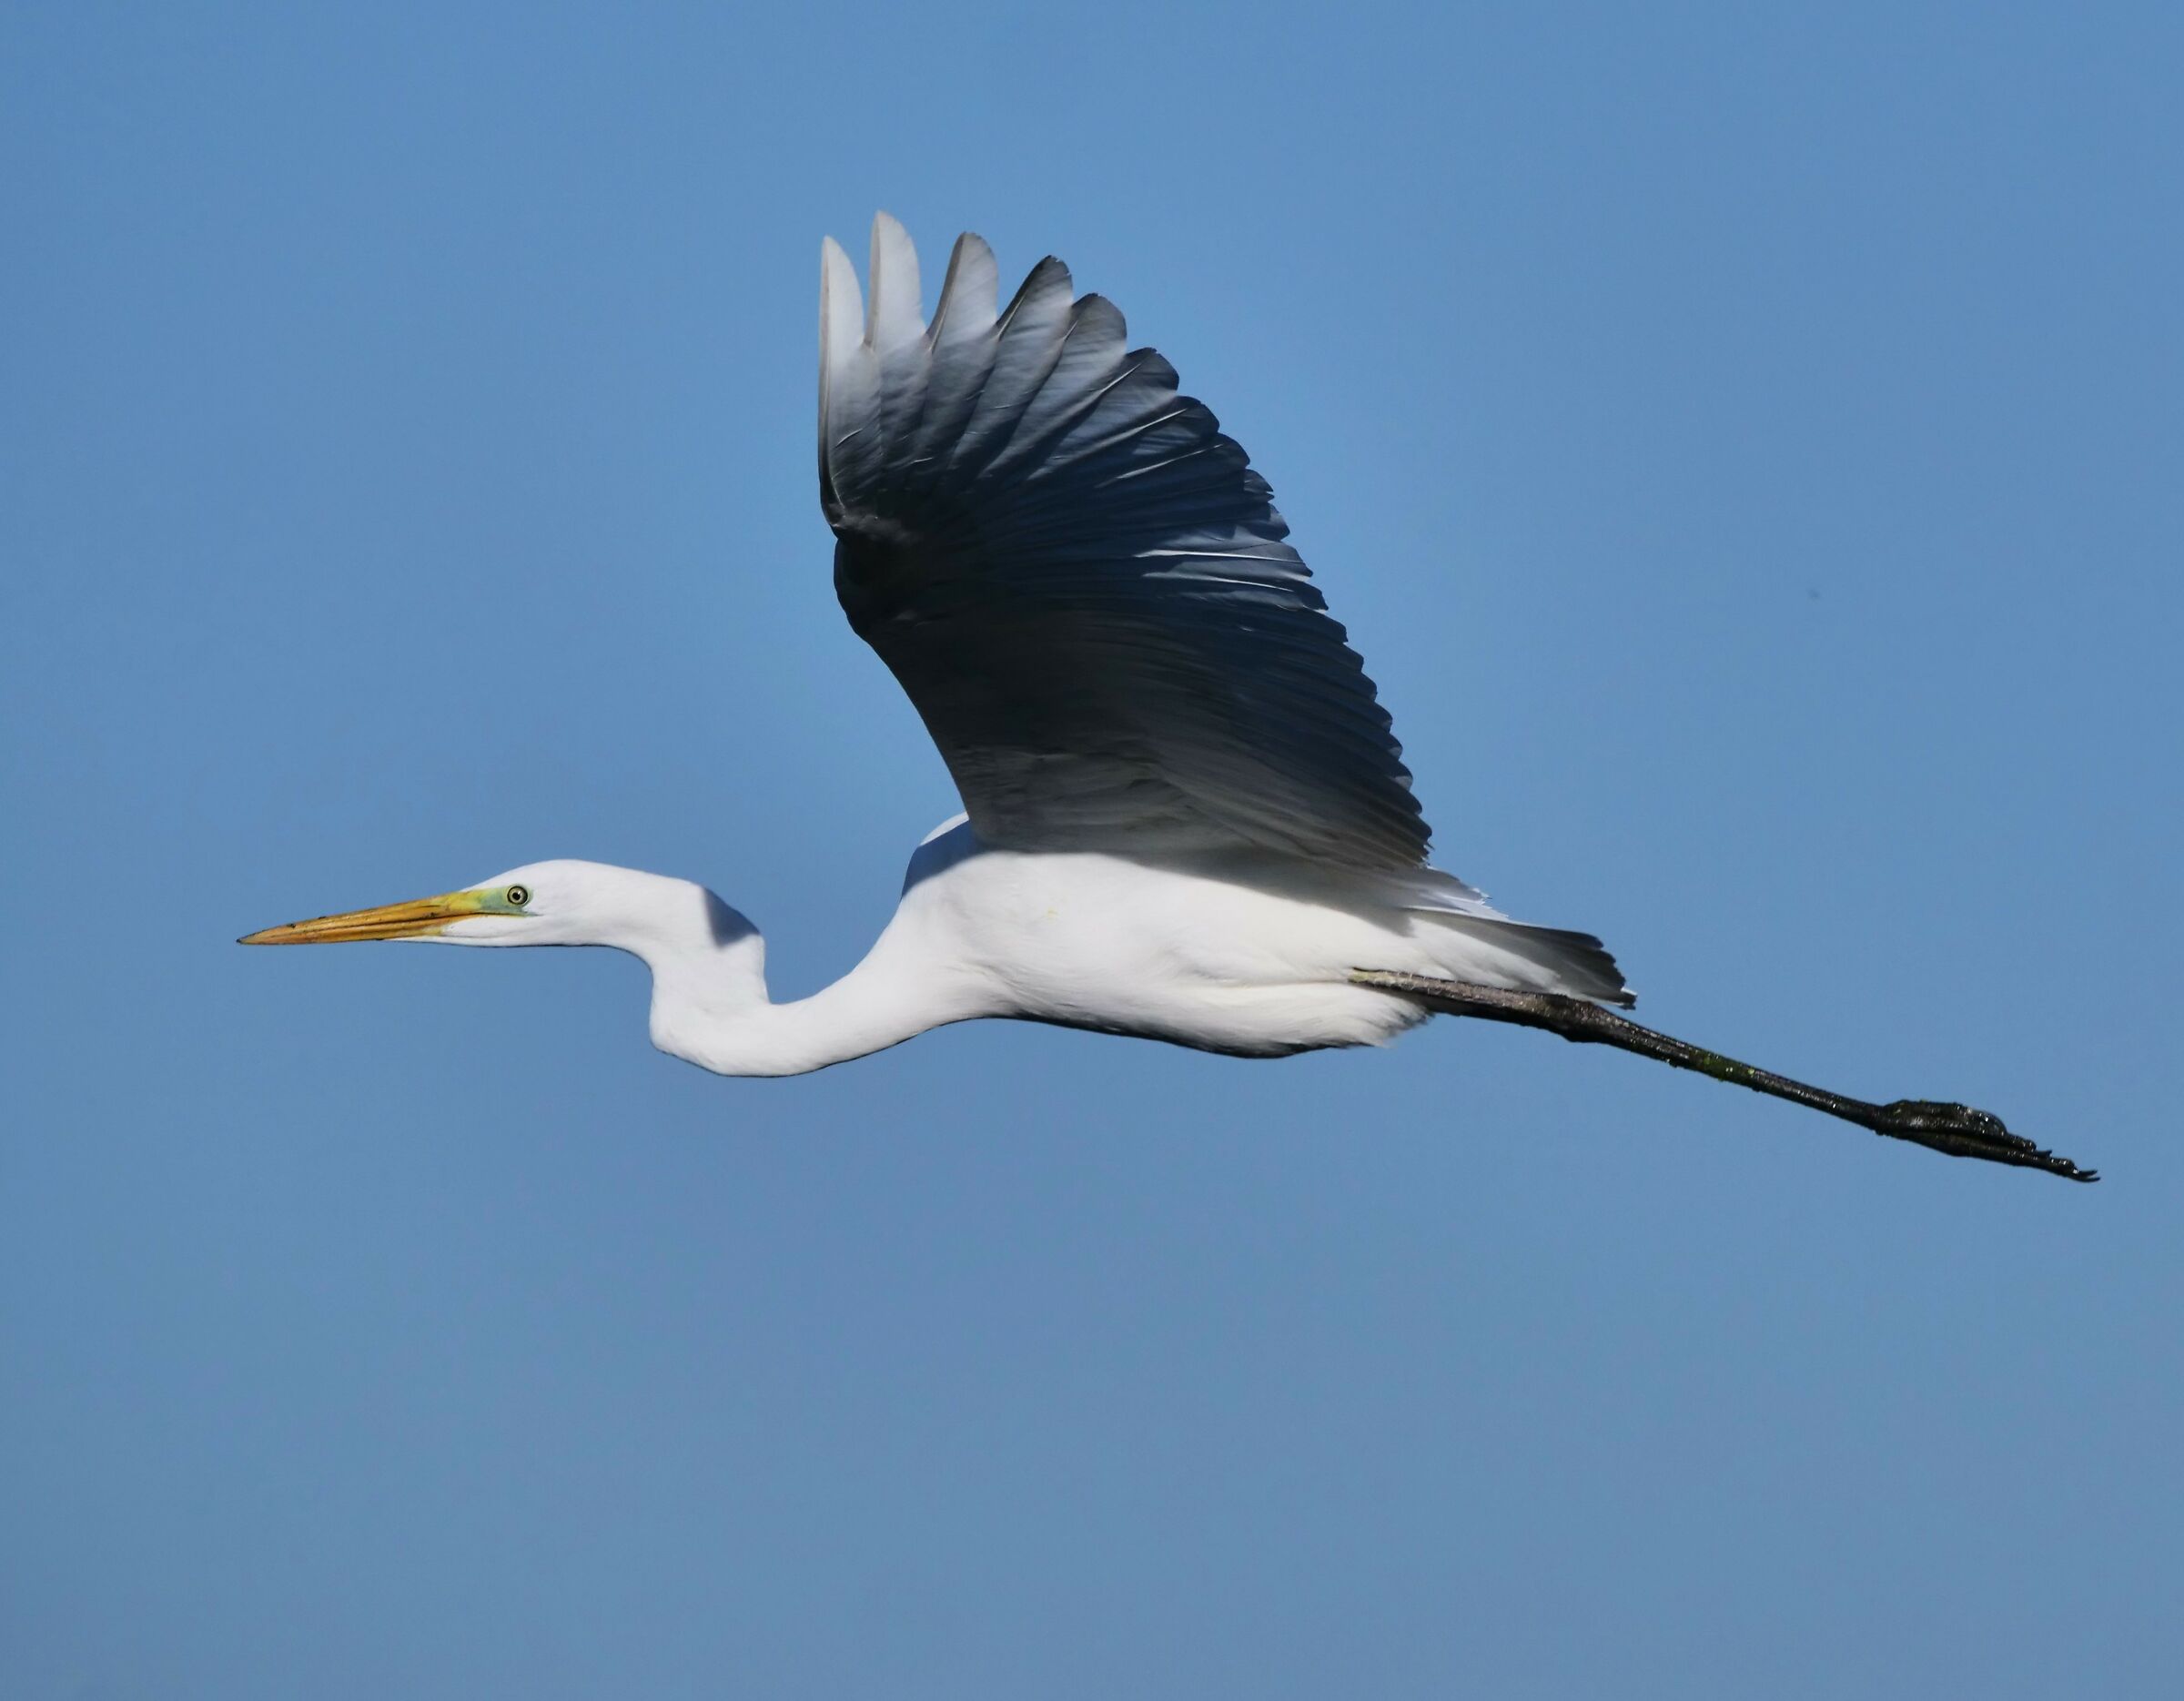 The flight of the Great White Heron...